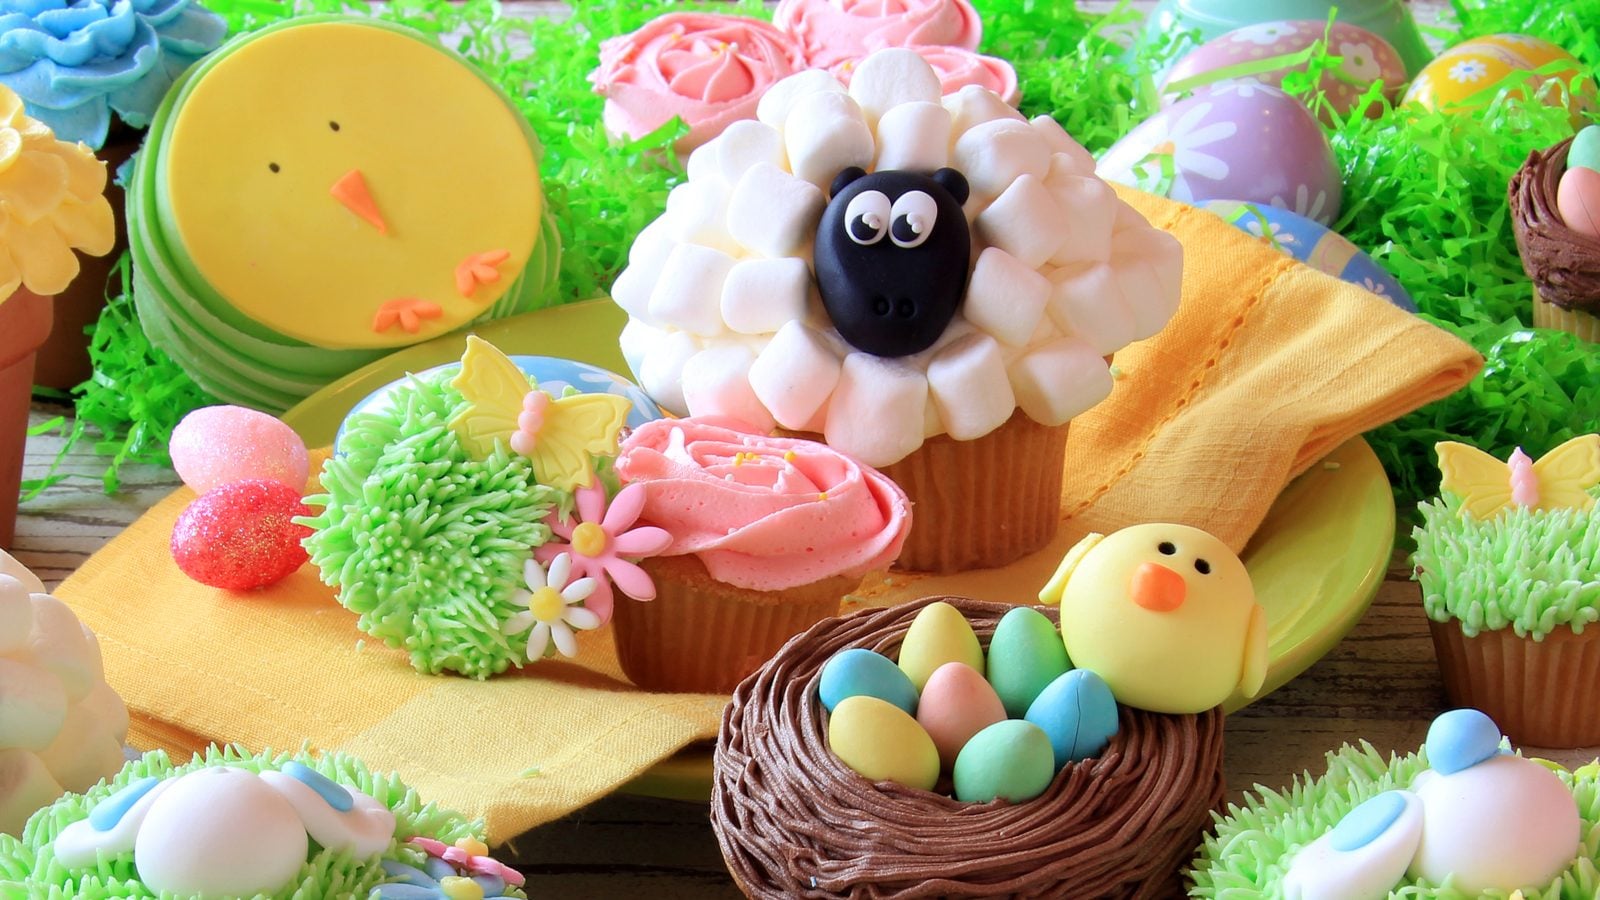 Easter 2022 Traditional Desserts That Will Wow the Entire Family